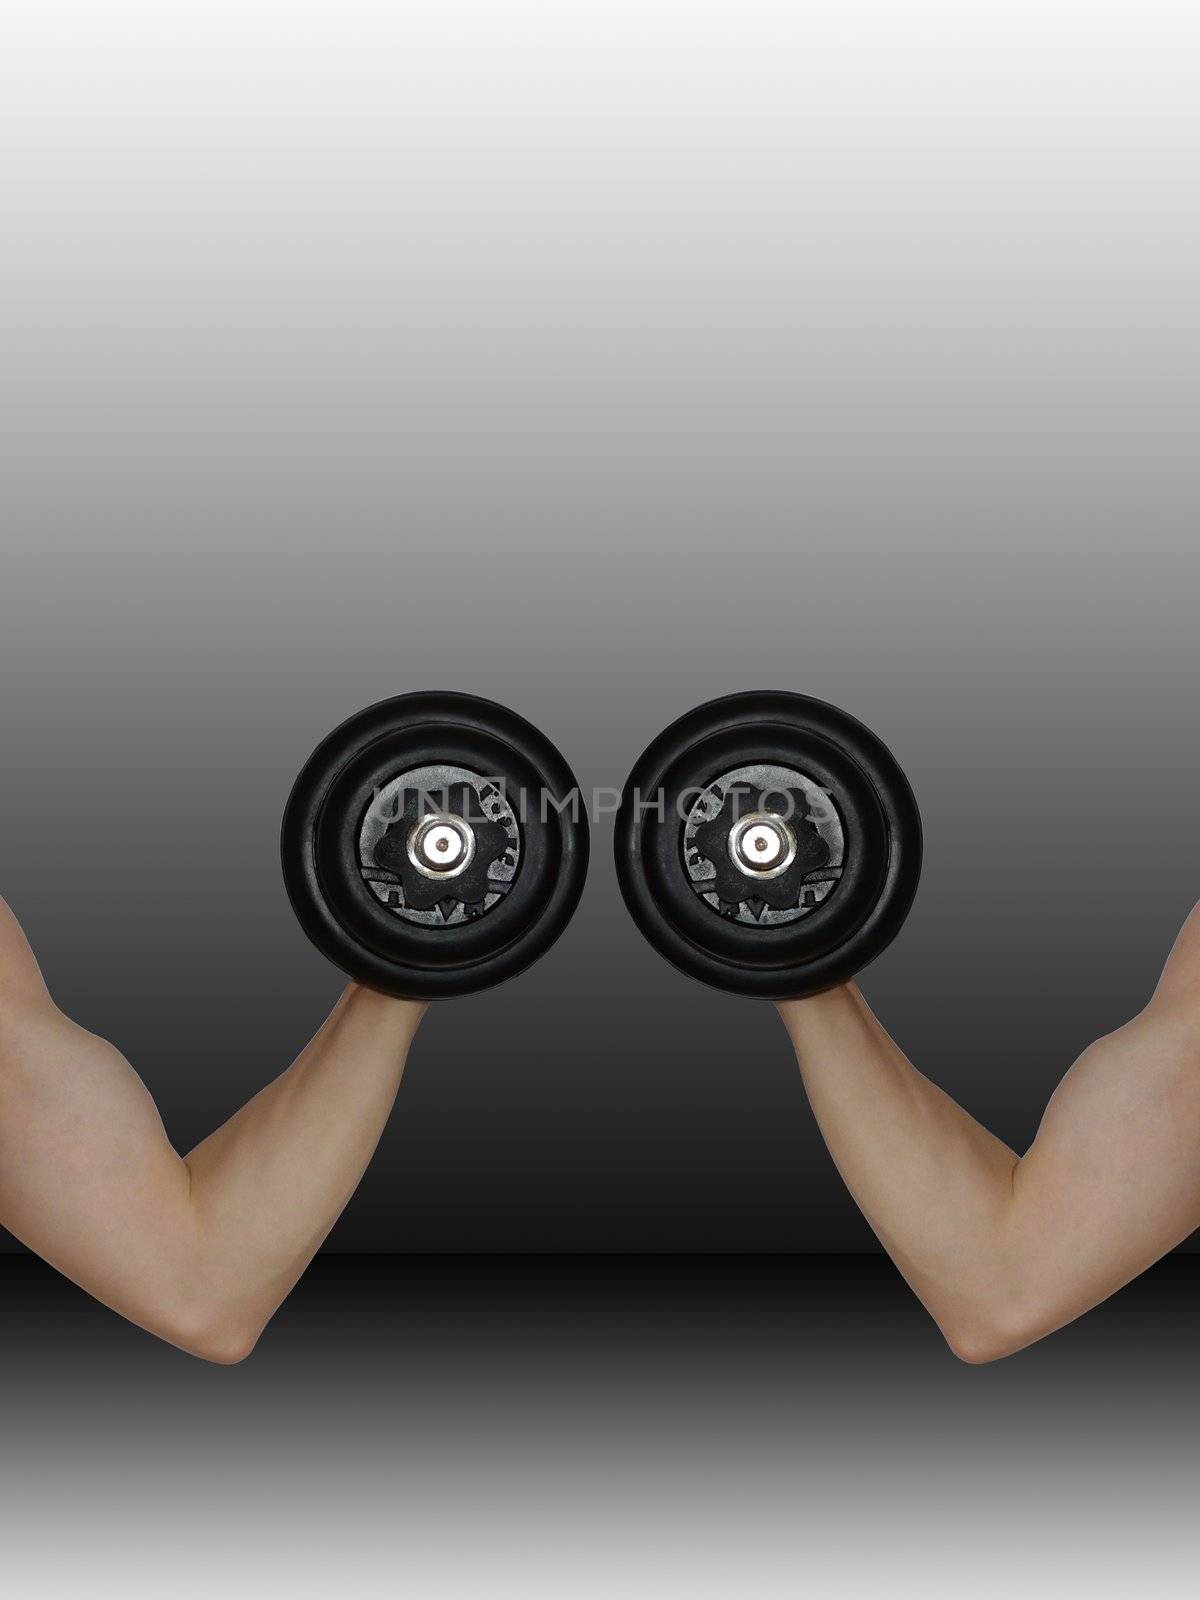 Image of two hands with dumbbell